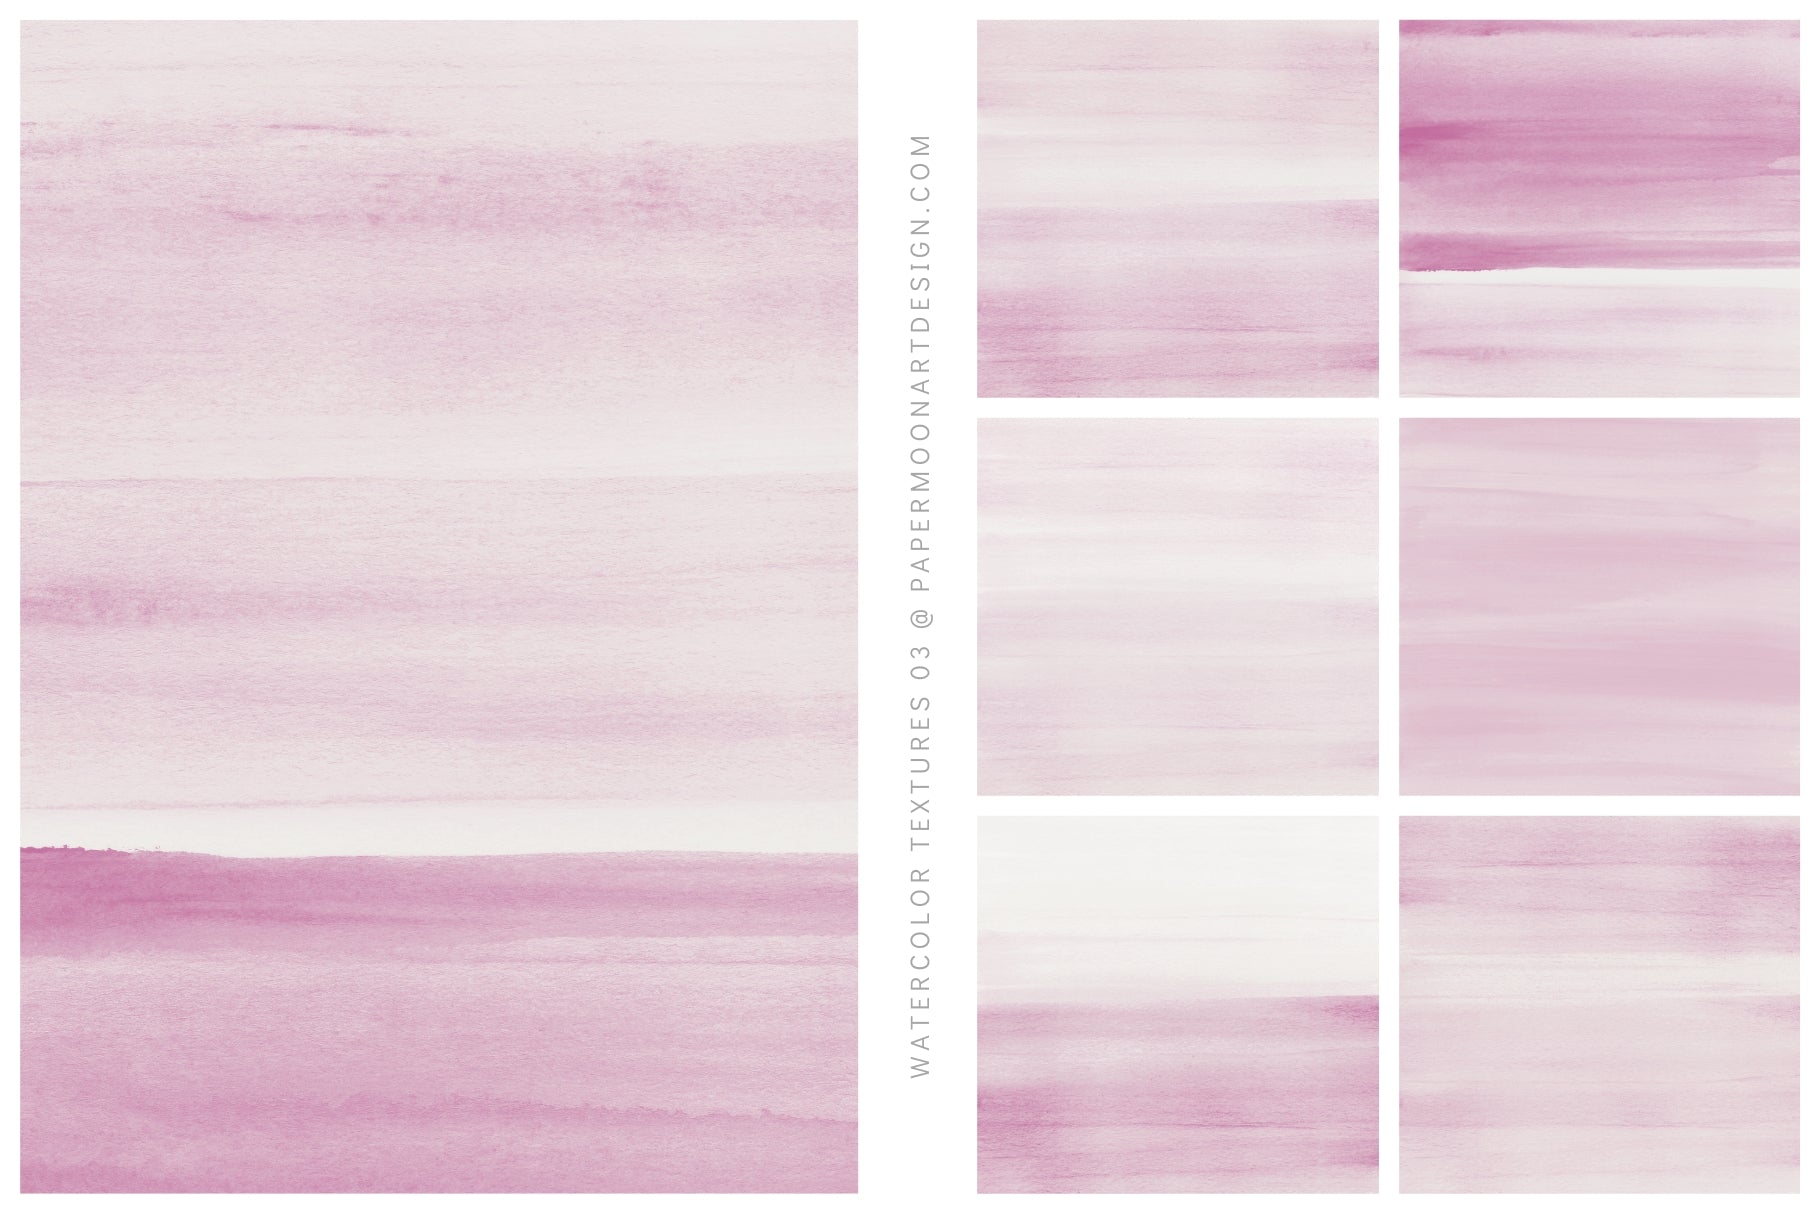 Watercolor Texture Backgrounds 03 Pink Blush Watercolor Textures